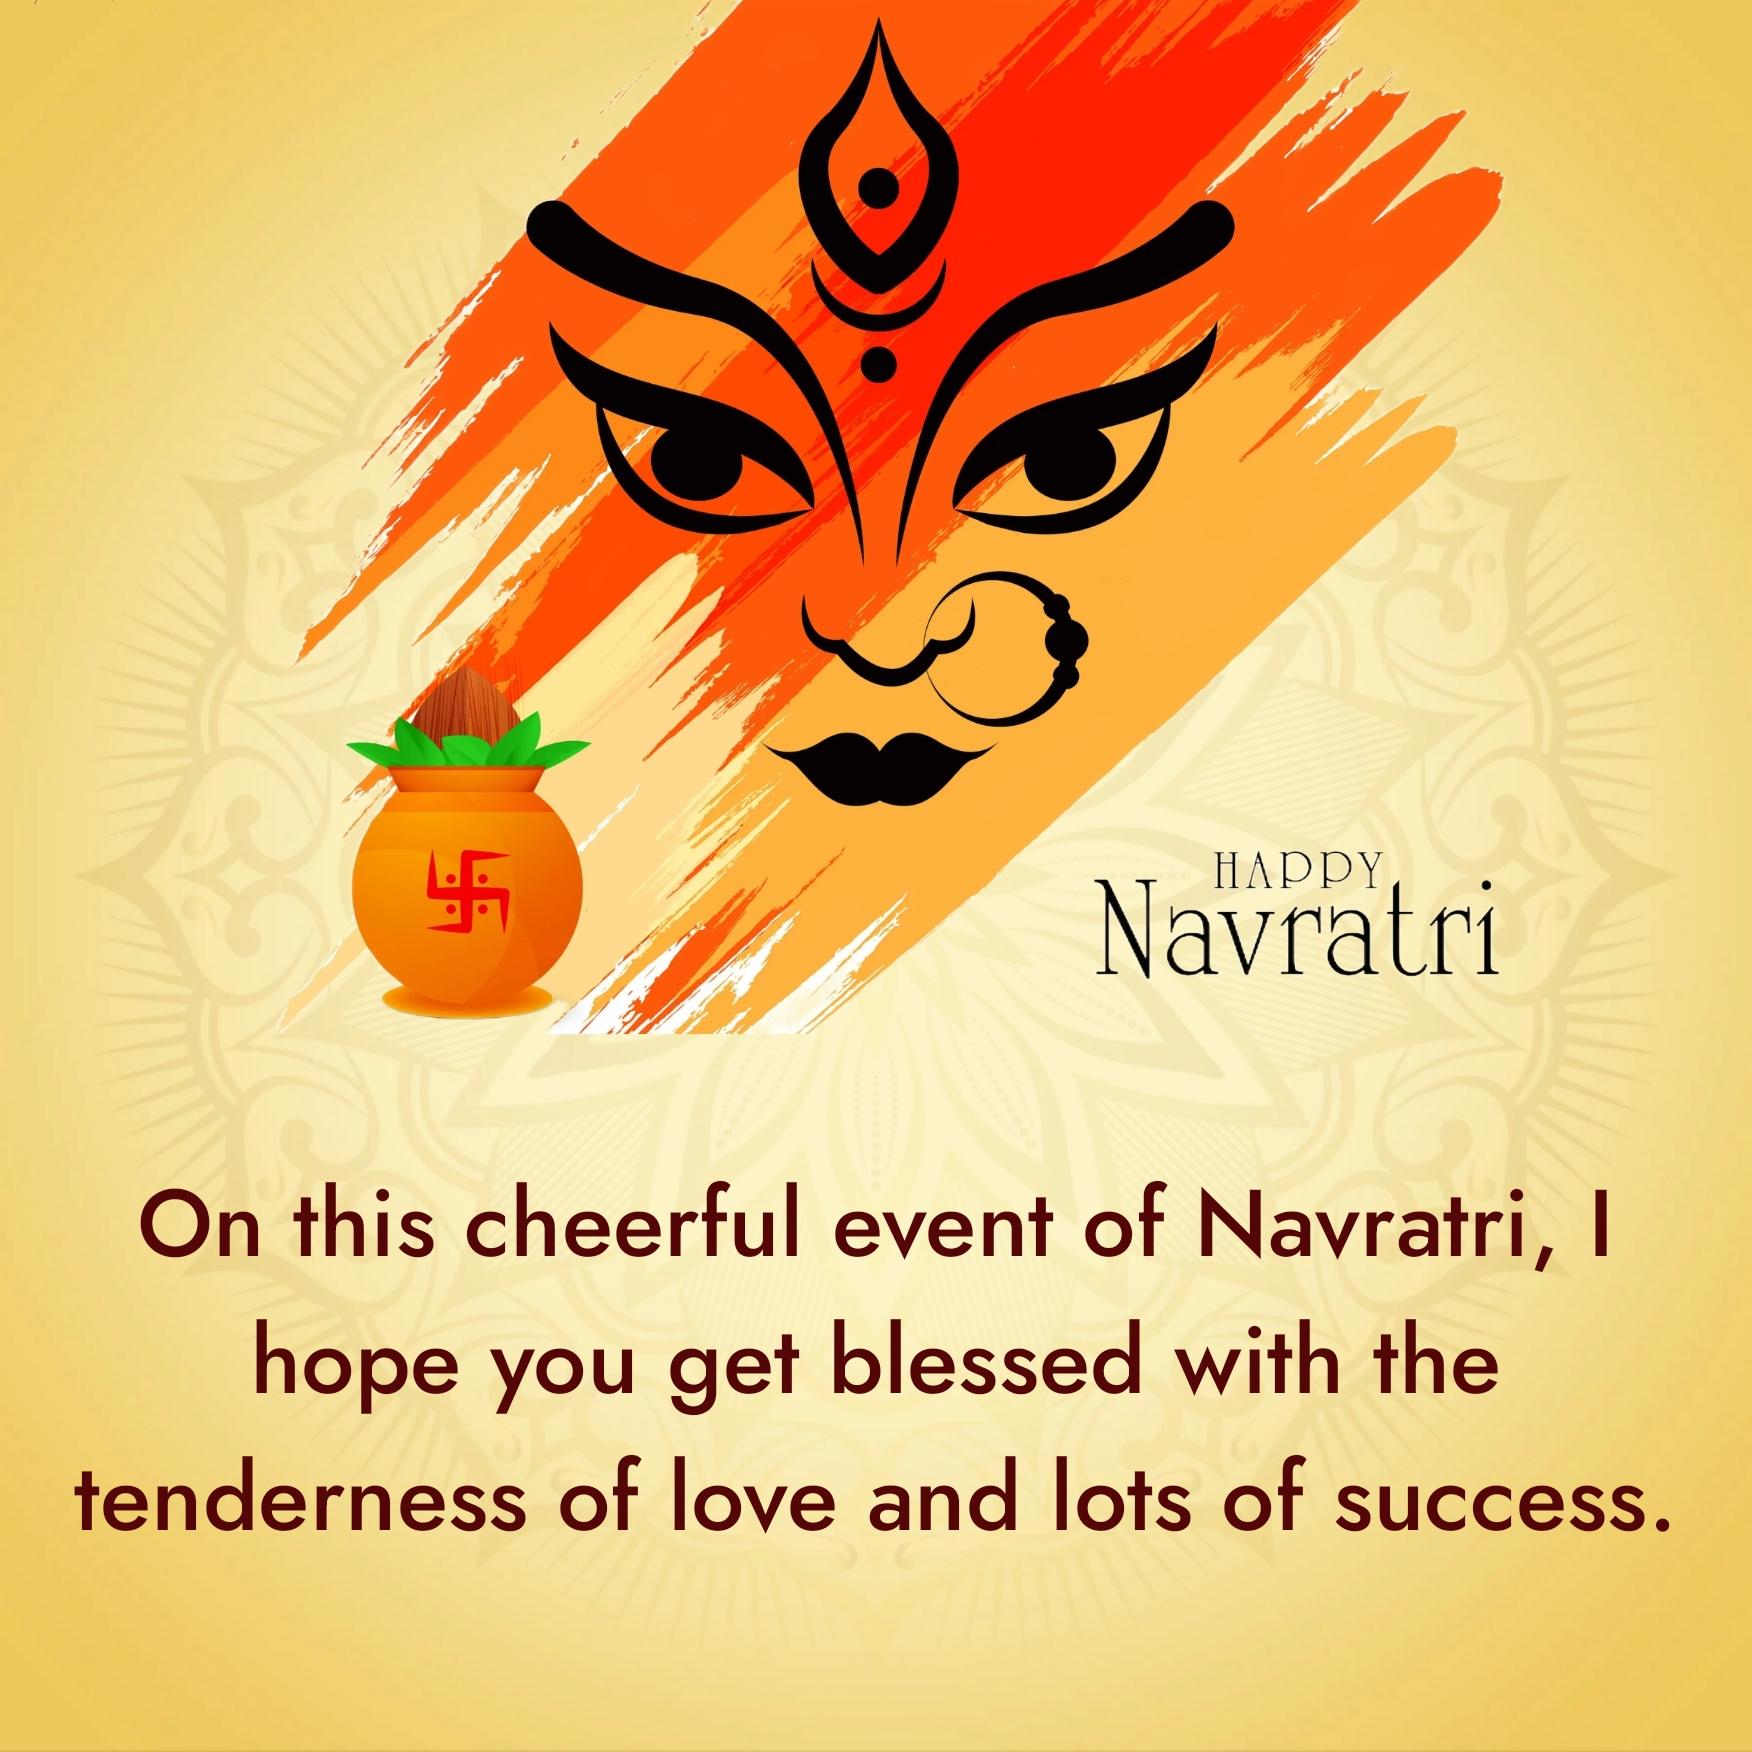 On this cheerful event of Navratri I hope you get blessed